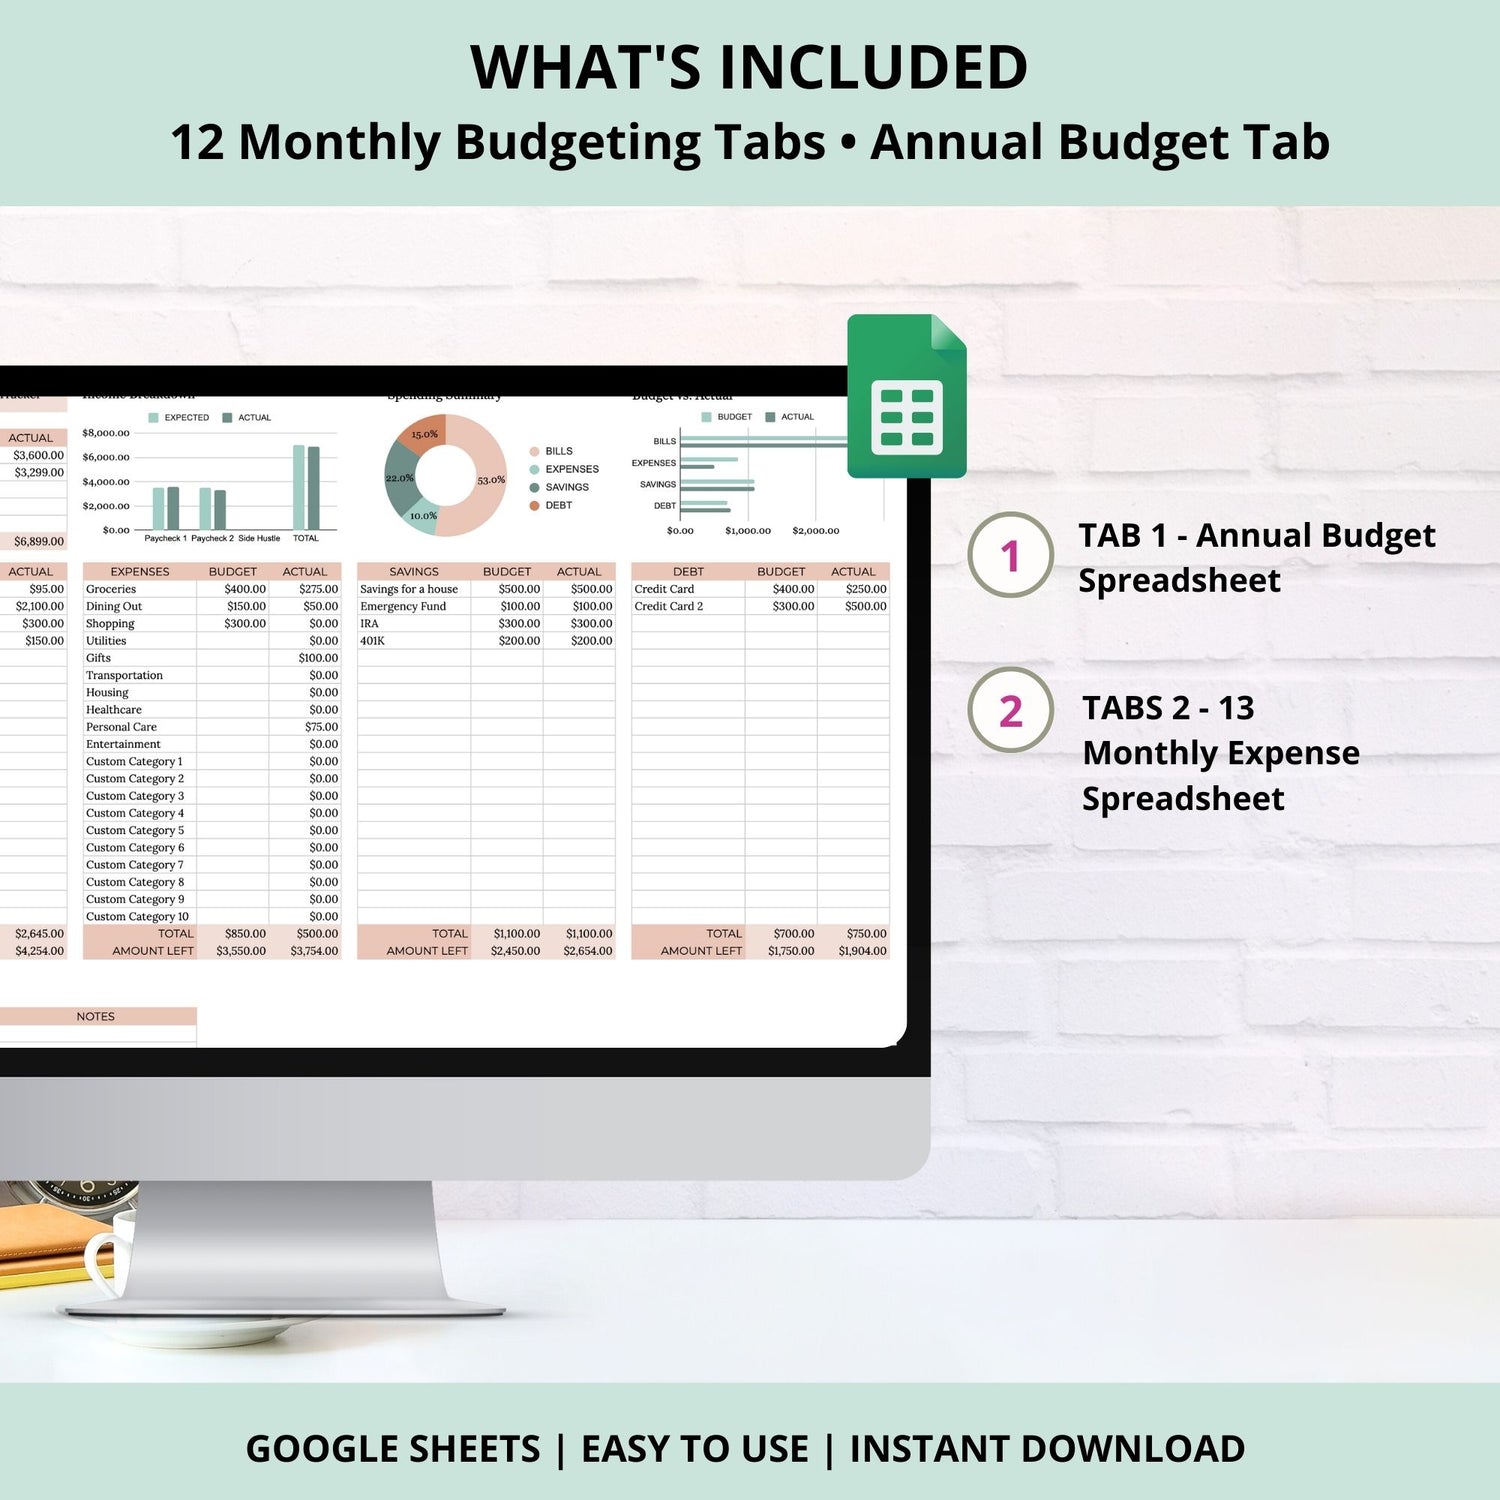 Achieve financial success with our meticulously designed Annual Budget Spreadsheet Template for Google Sheets. This comprehensive budgeting tool empowers you to take control of your finances, month by month, with ease and precision. 